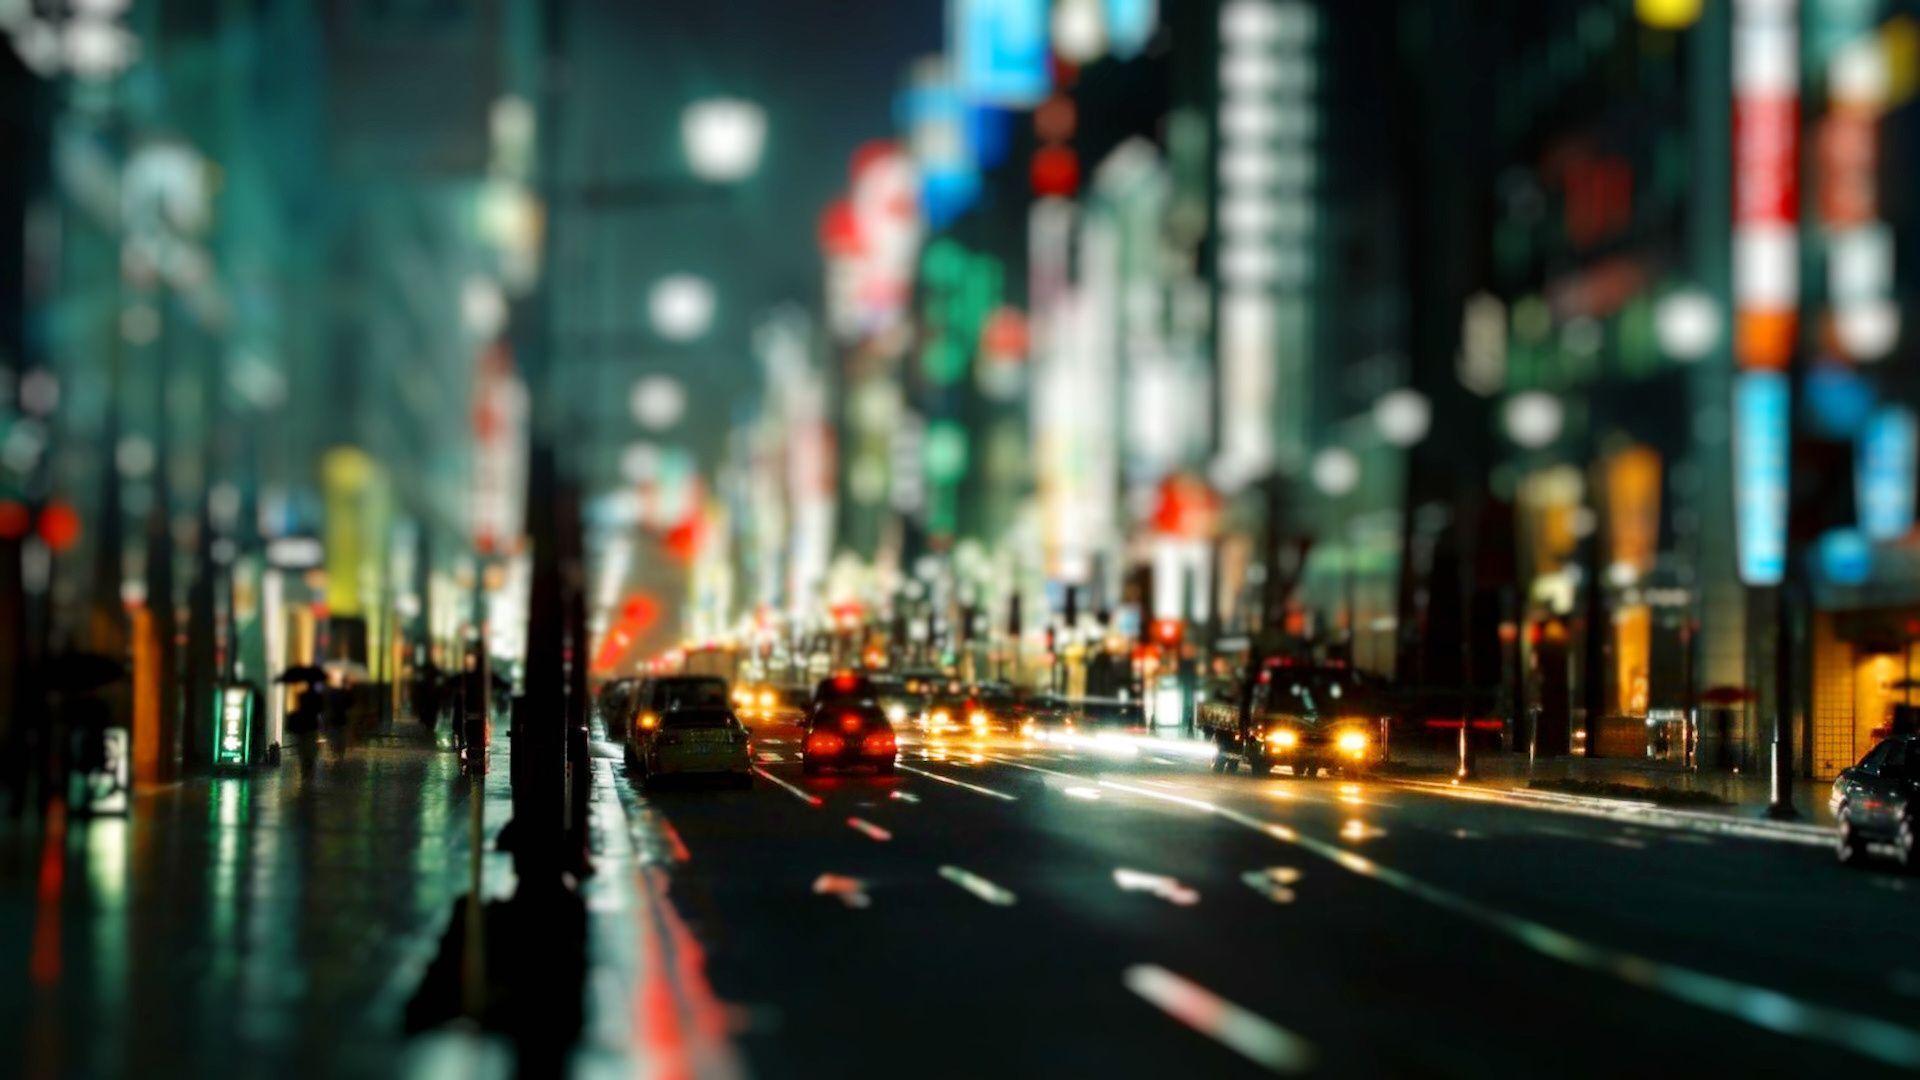 Street lights, Abstract, City, Colours, Cool, Evening, Lights